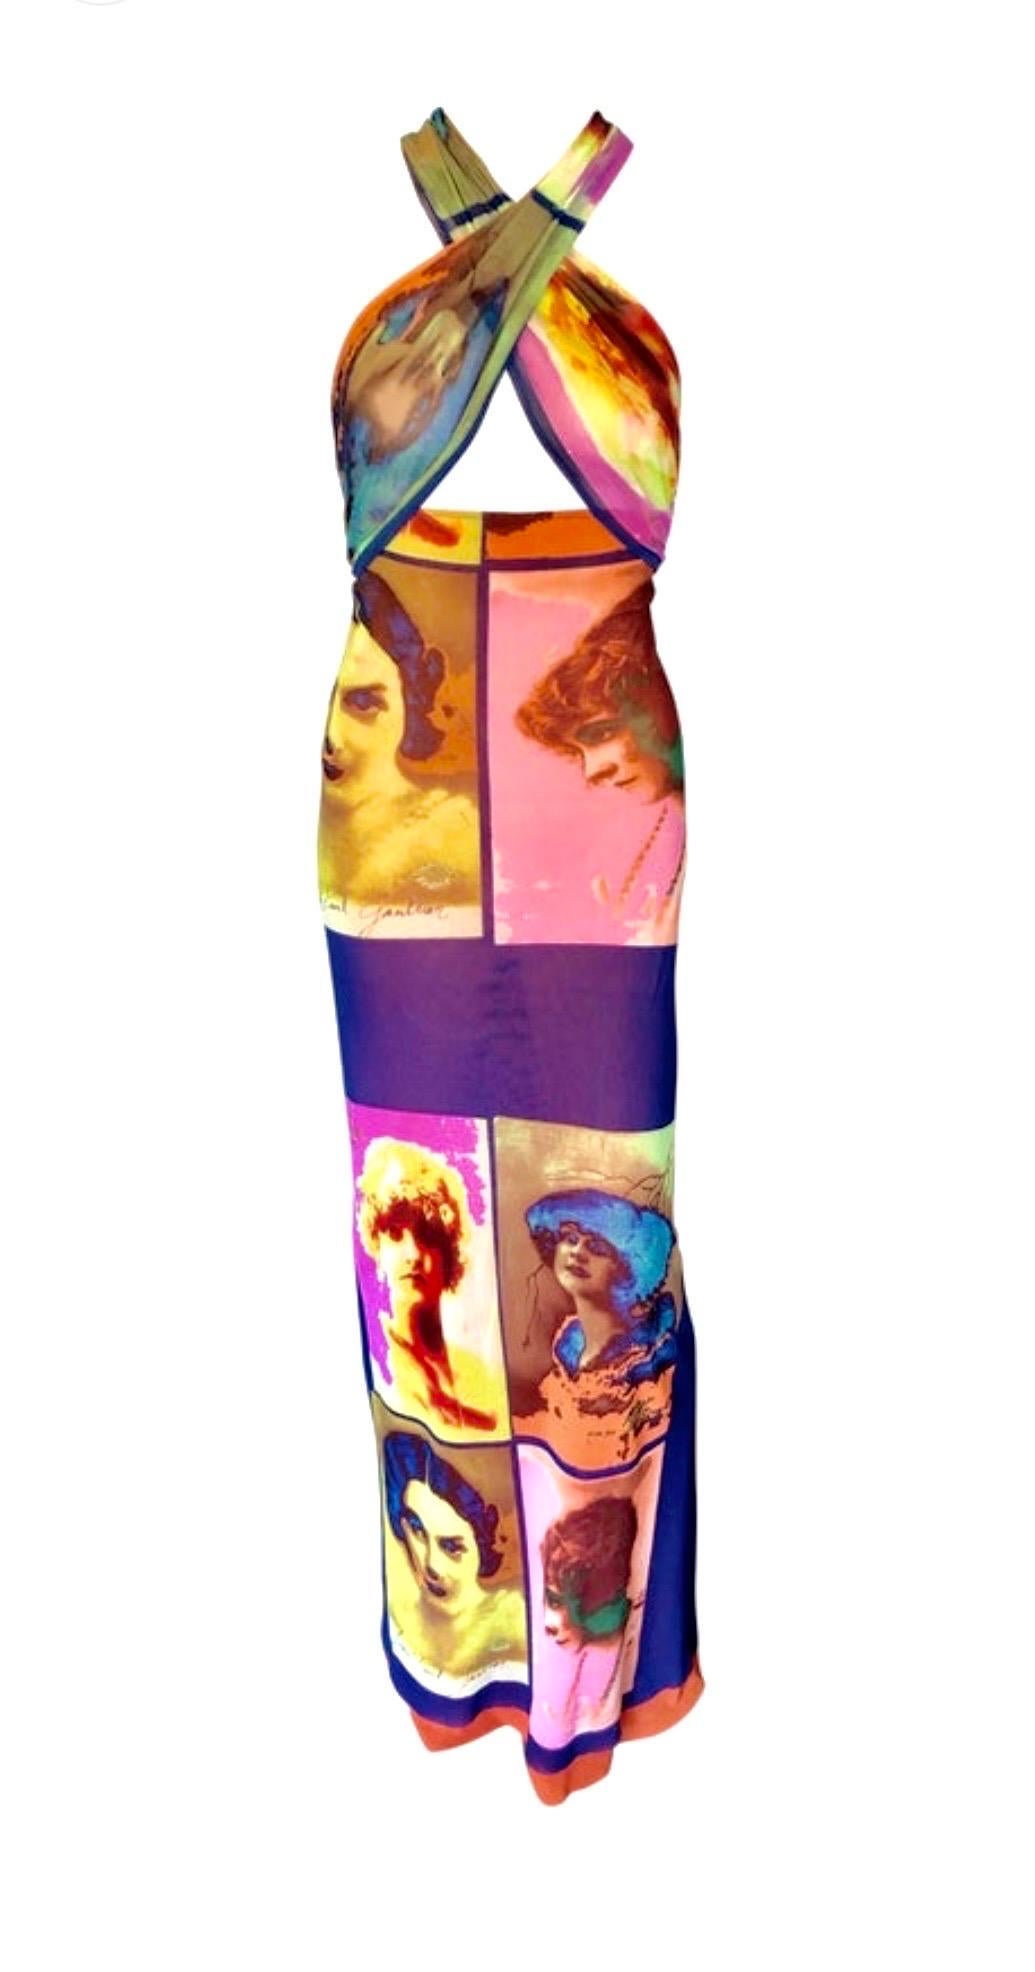 Jean Paul Gaultier Soleil S/S 2002 Vintage “Portraits” Faces Mesh Maxi Dress Size L

As seen on Kylie Jenner previously, purchased from us!


